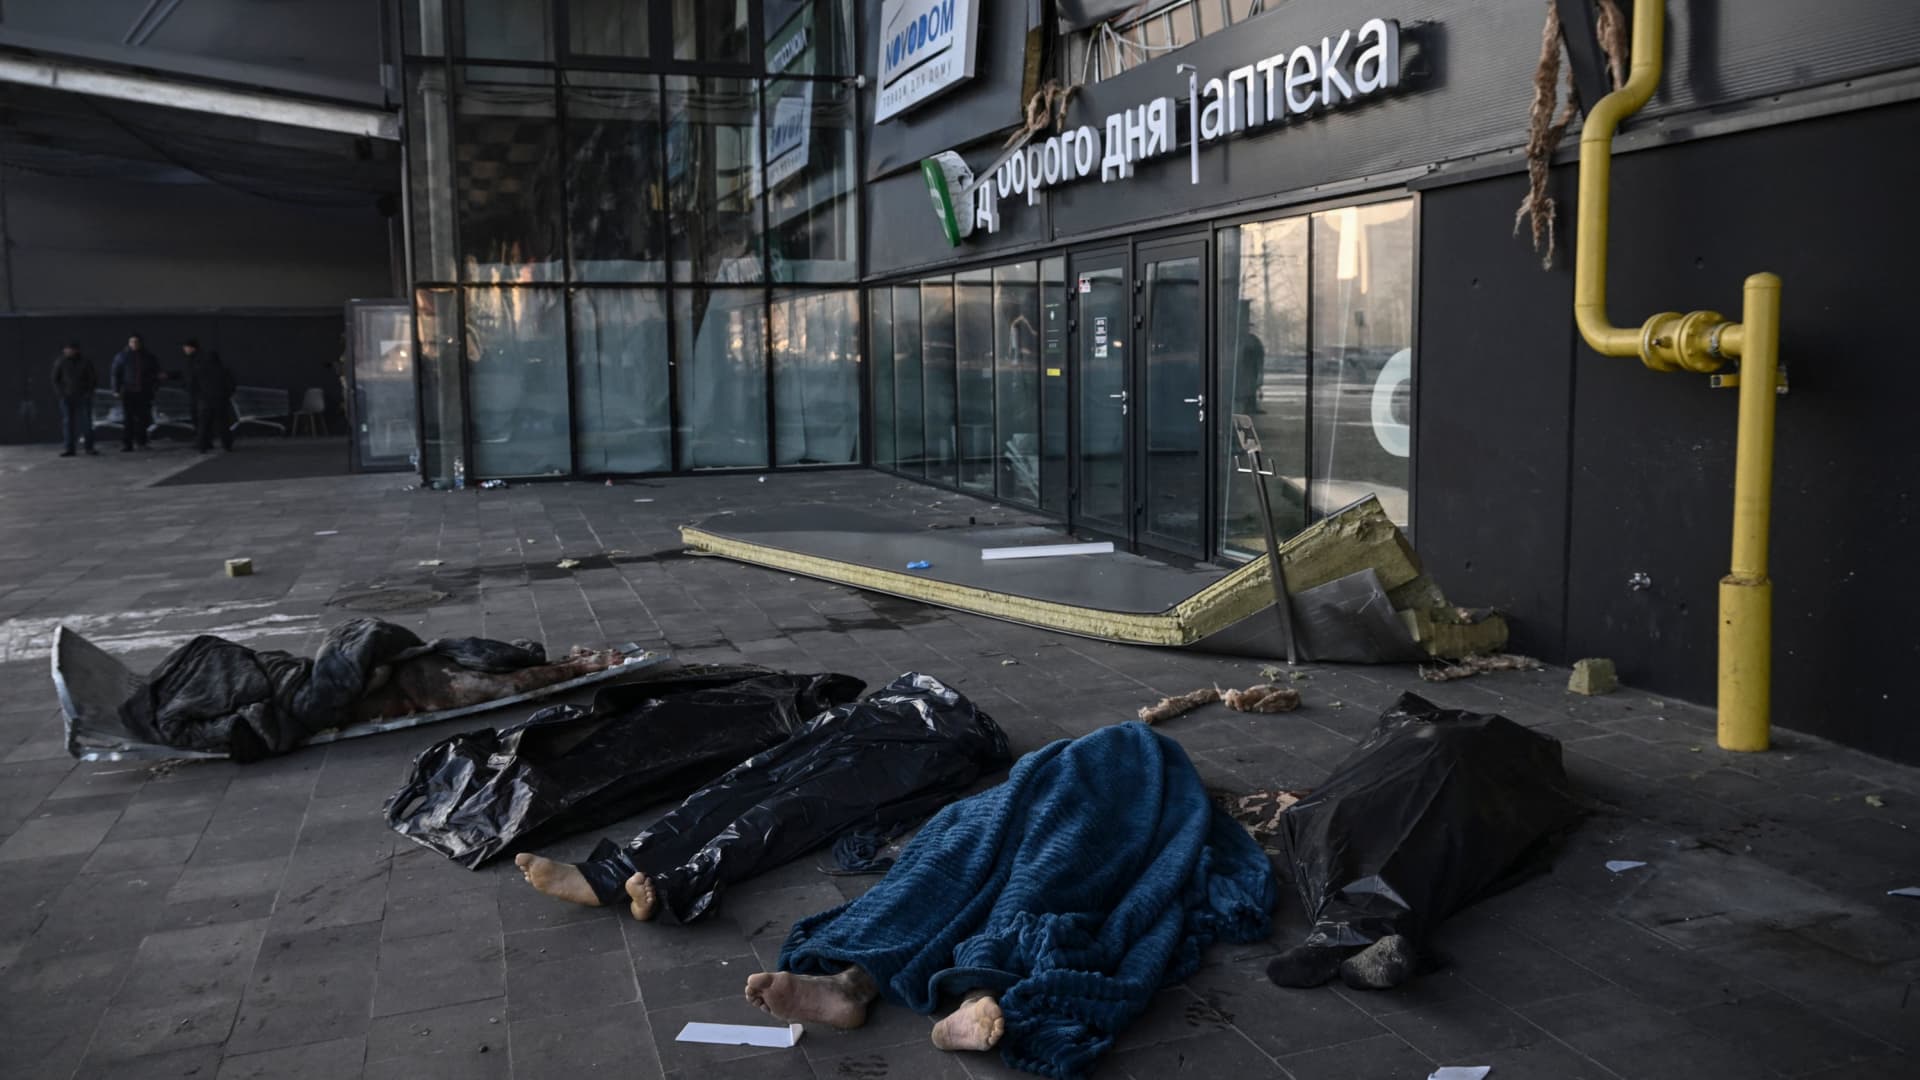 EDITORS NOTE: Graphic content / Bodies of Ukranian servicemen are covered with blankets and plastic bags outside the Retroville shopping mall following a Russian missile attack in Kyiv on March 21, 2022.